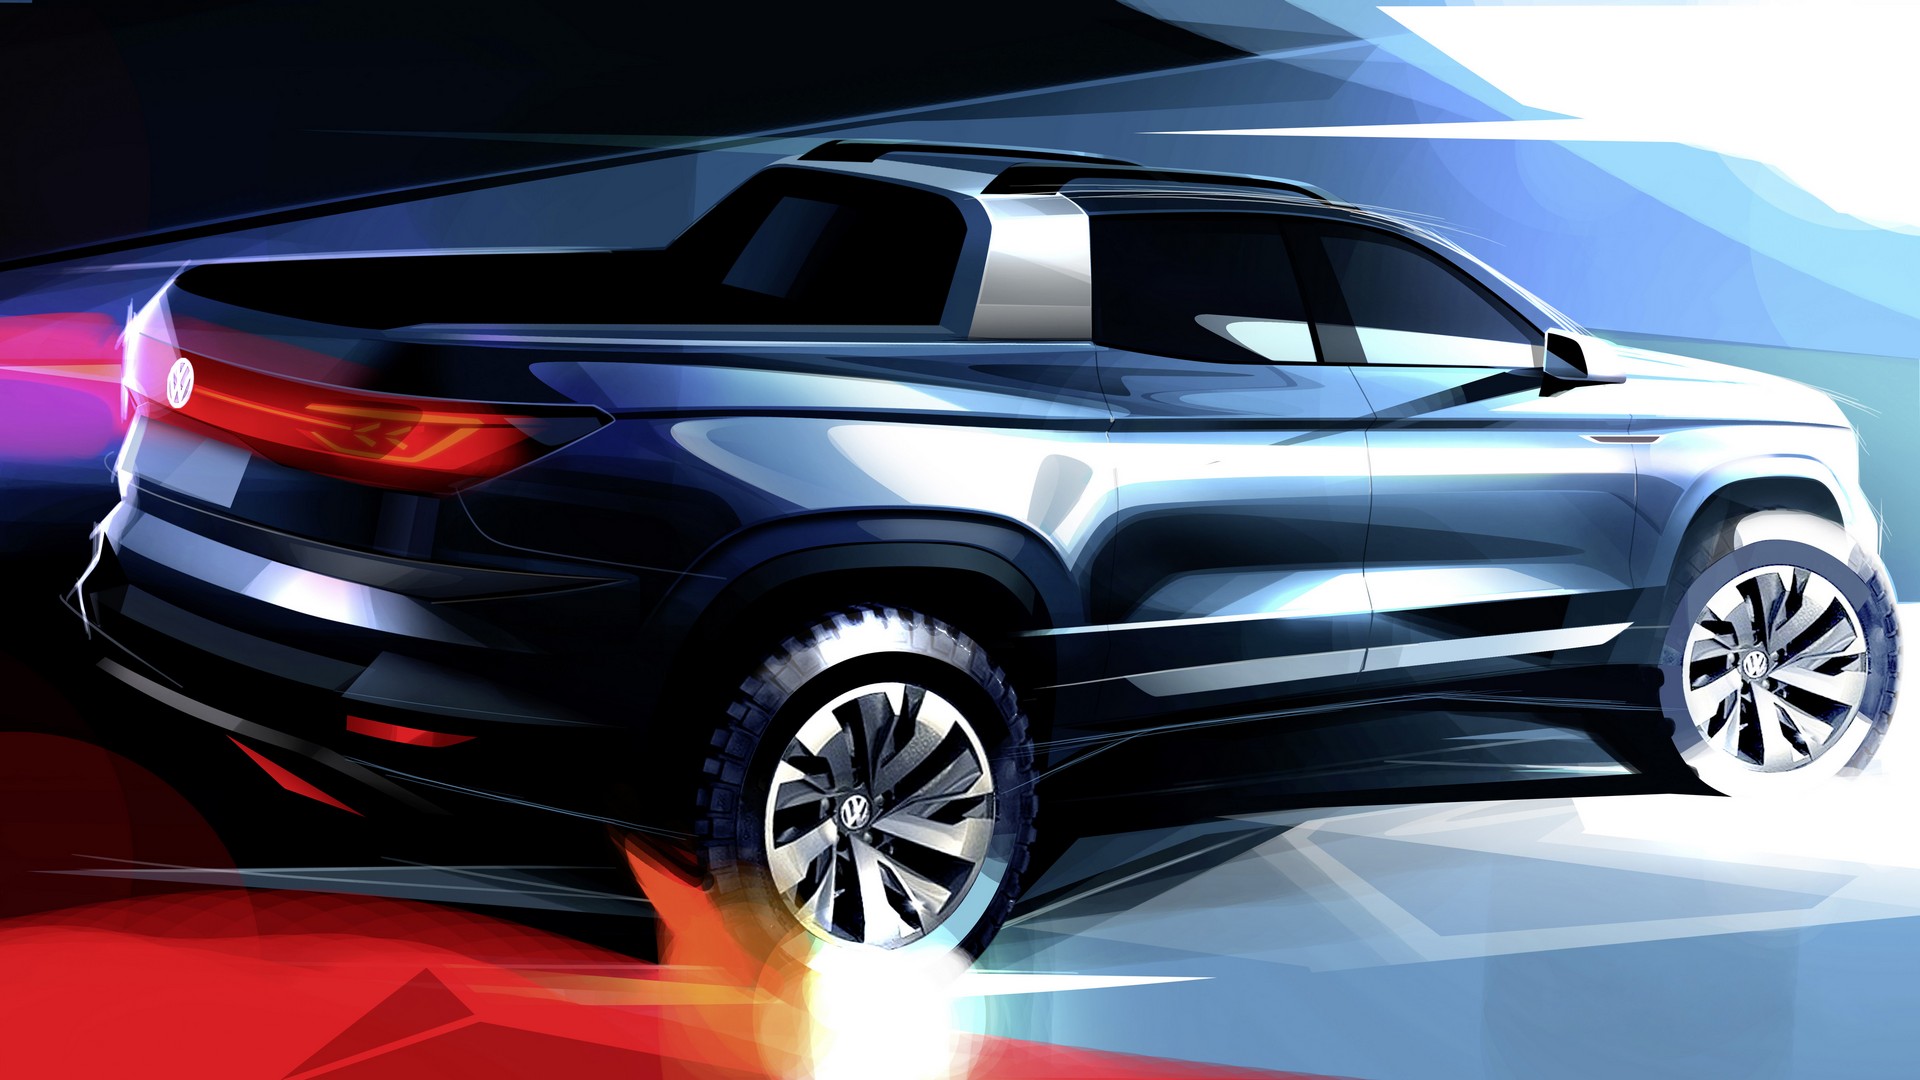 New Vw Compact Pickup Concept Teased Previews 2020 Production Model